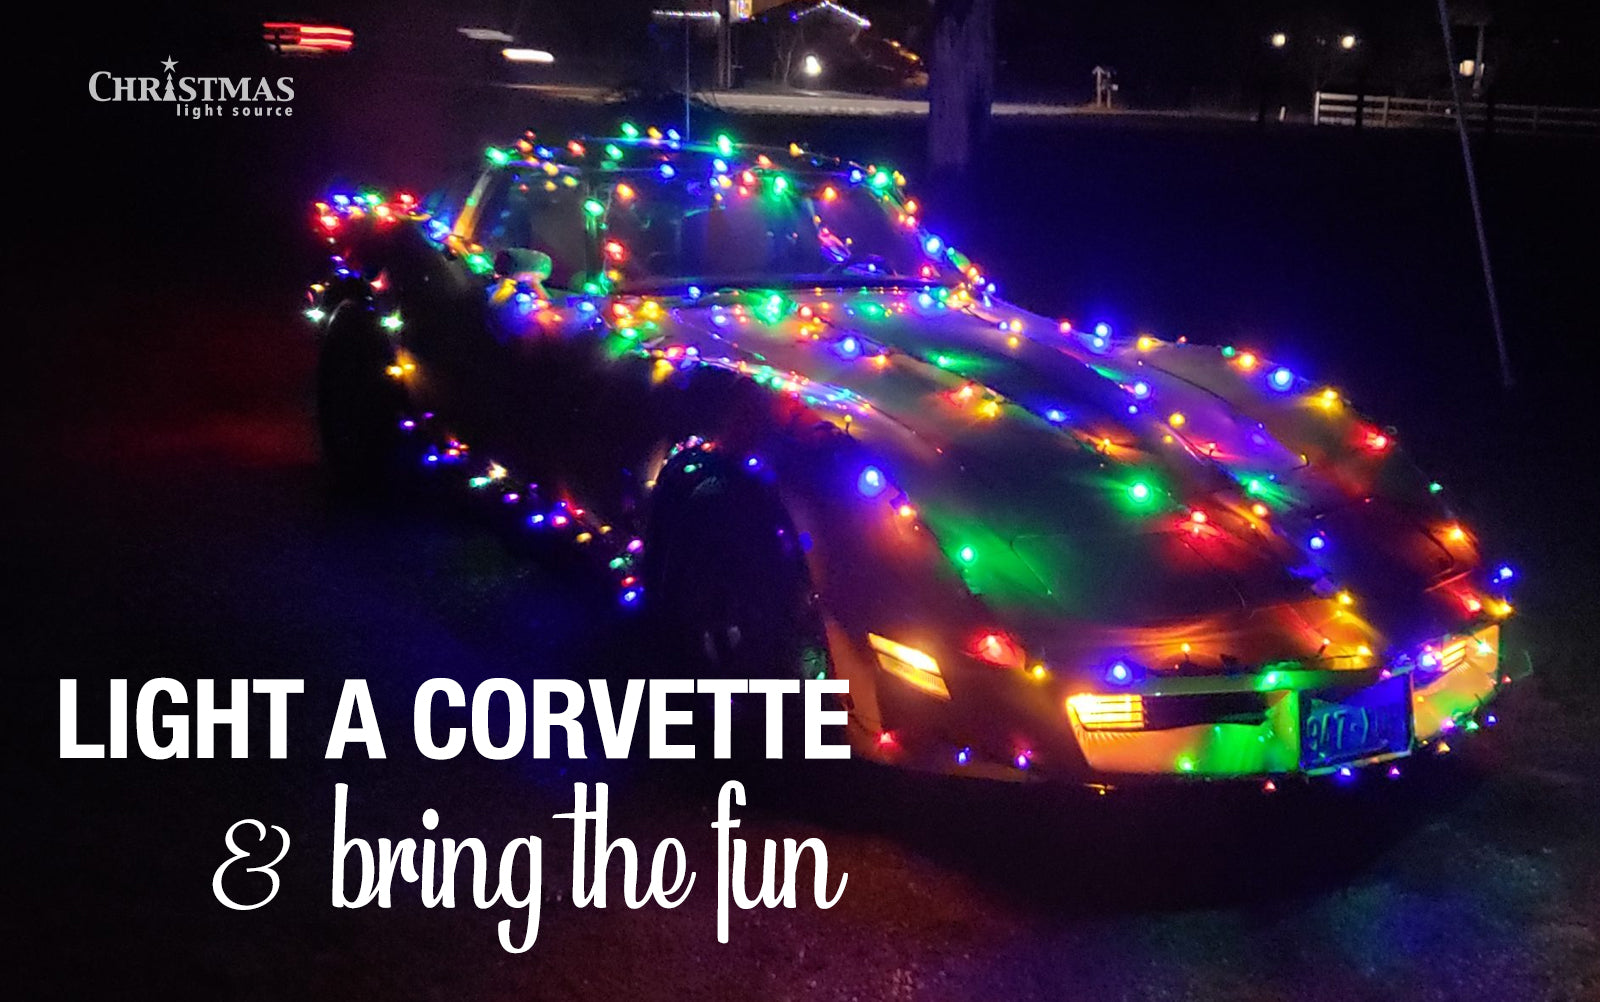 Our Lights in Action: Light a Corvette and bring the fun!